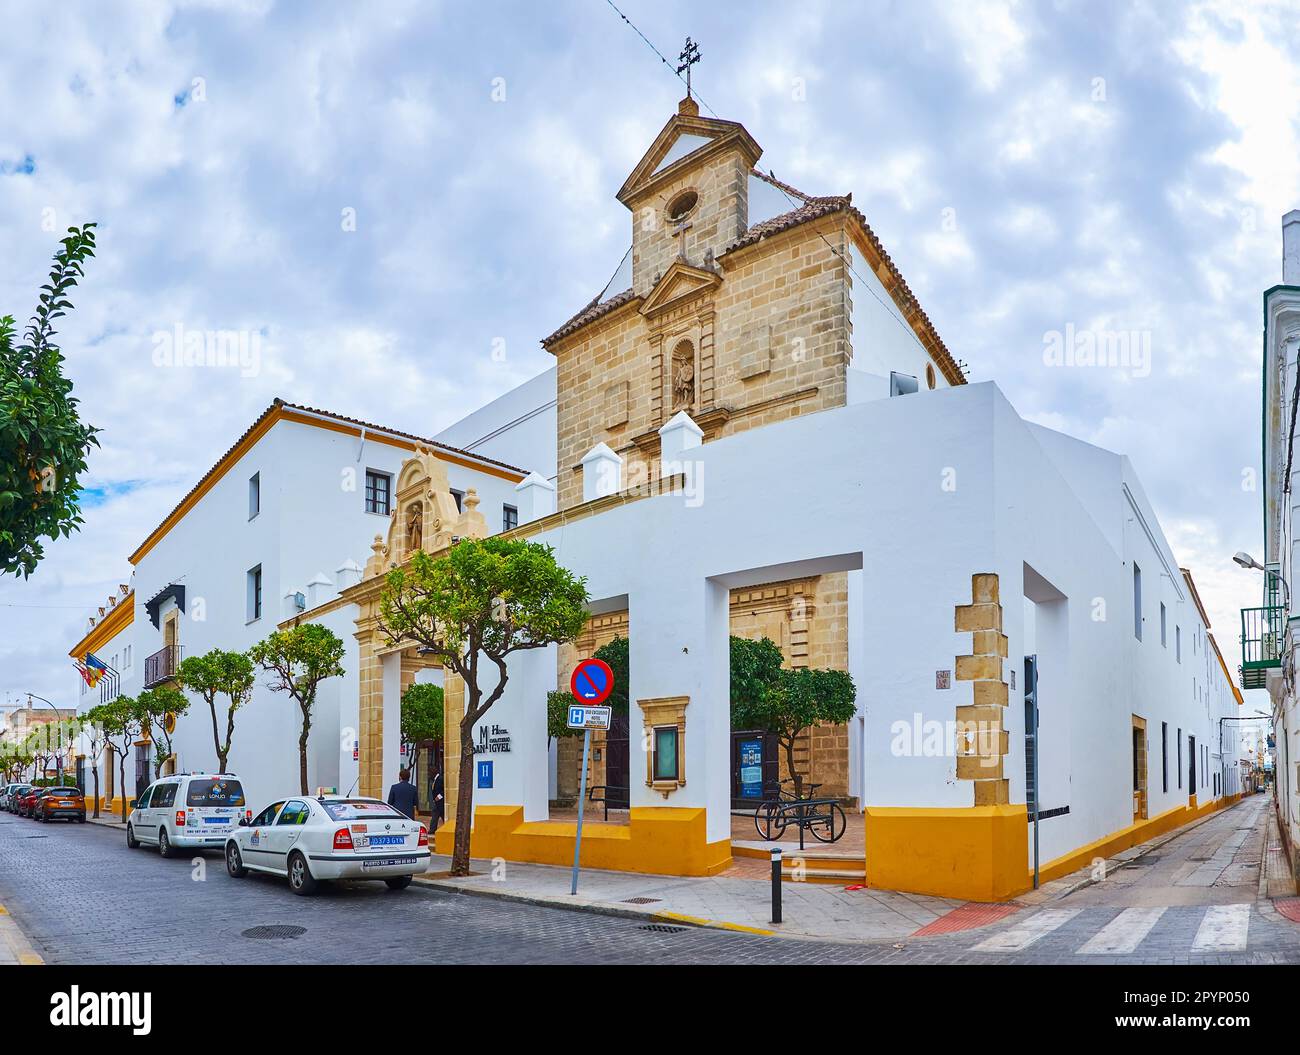 EL PUERTO, SPAIN - SEPT 21, 2019: The facade of historic Convent of San Miguel Arcangel with stone gate in the foreground, on Sept 21 in El Puerto Stock Photo